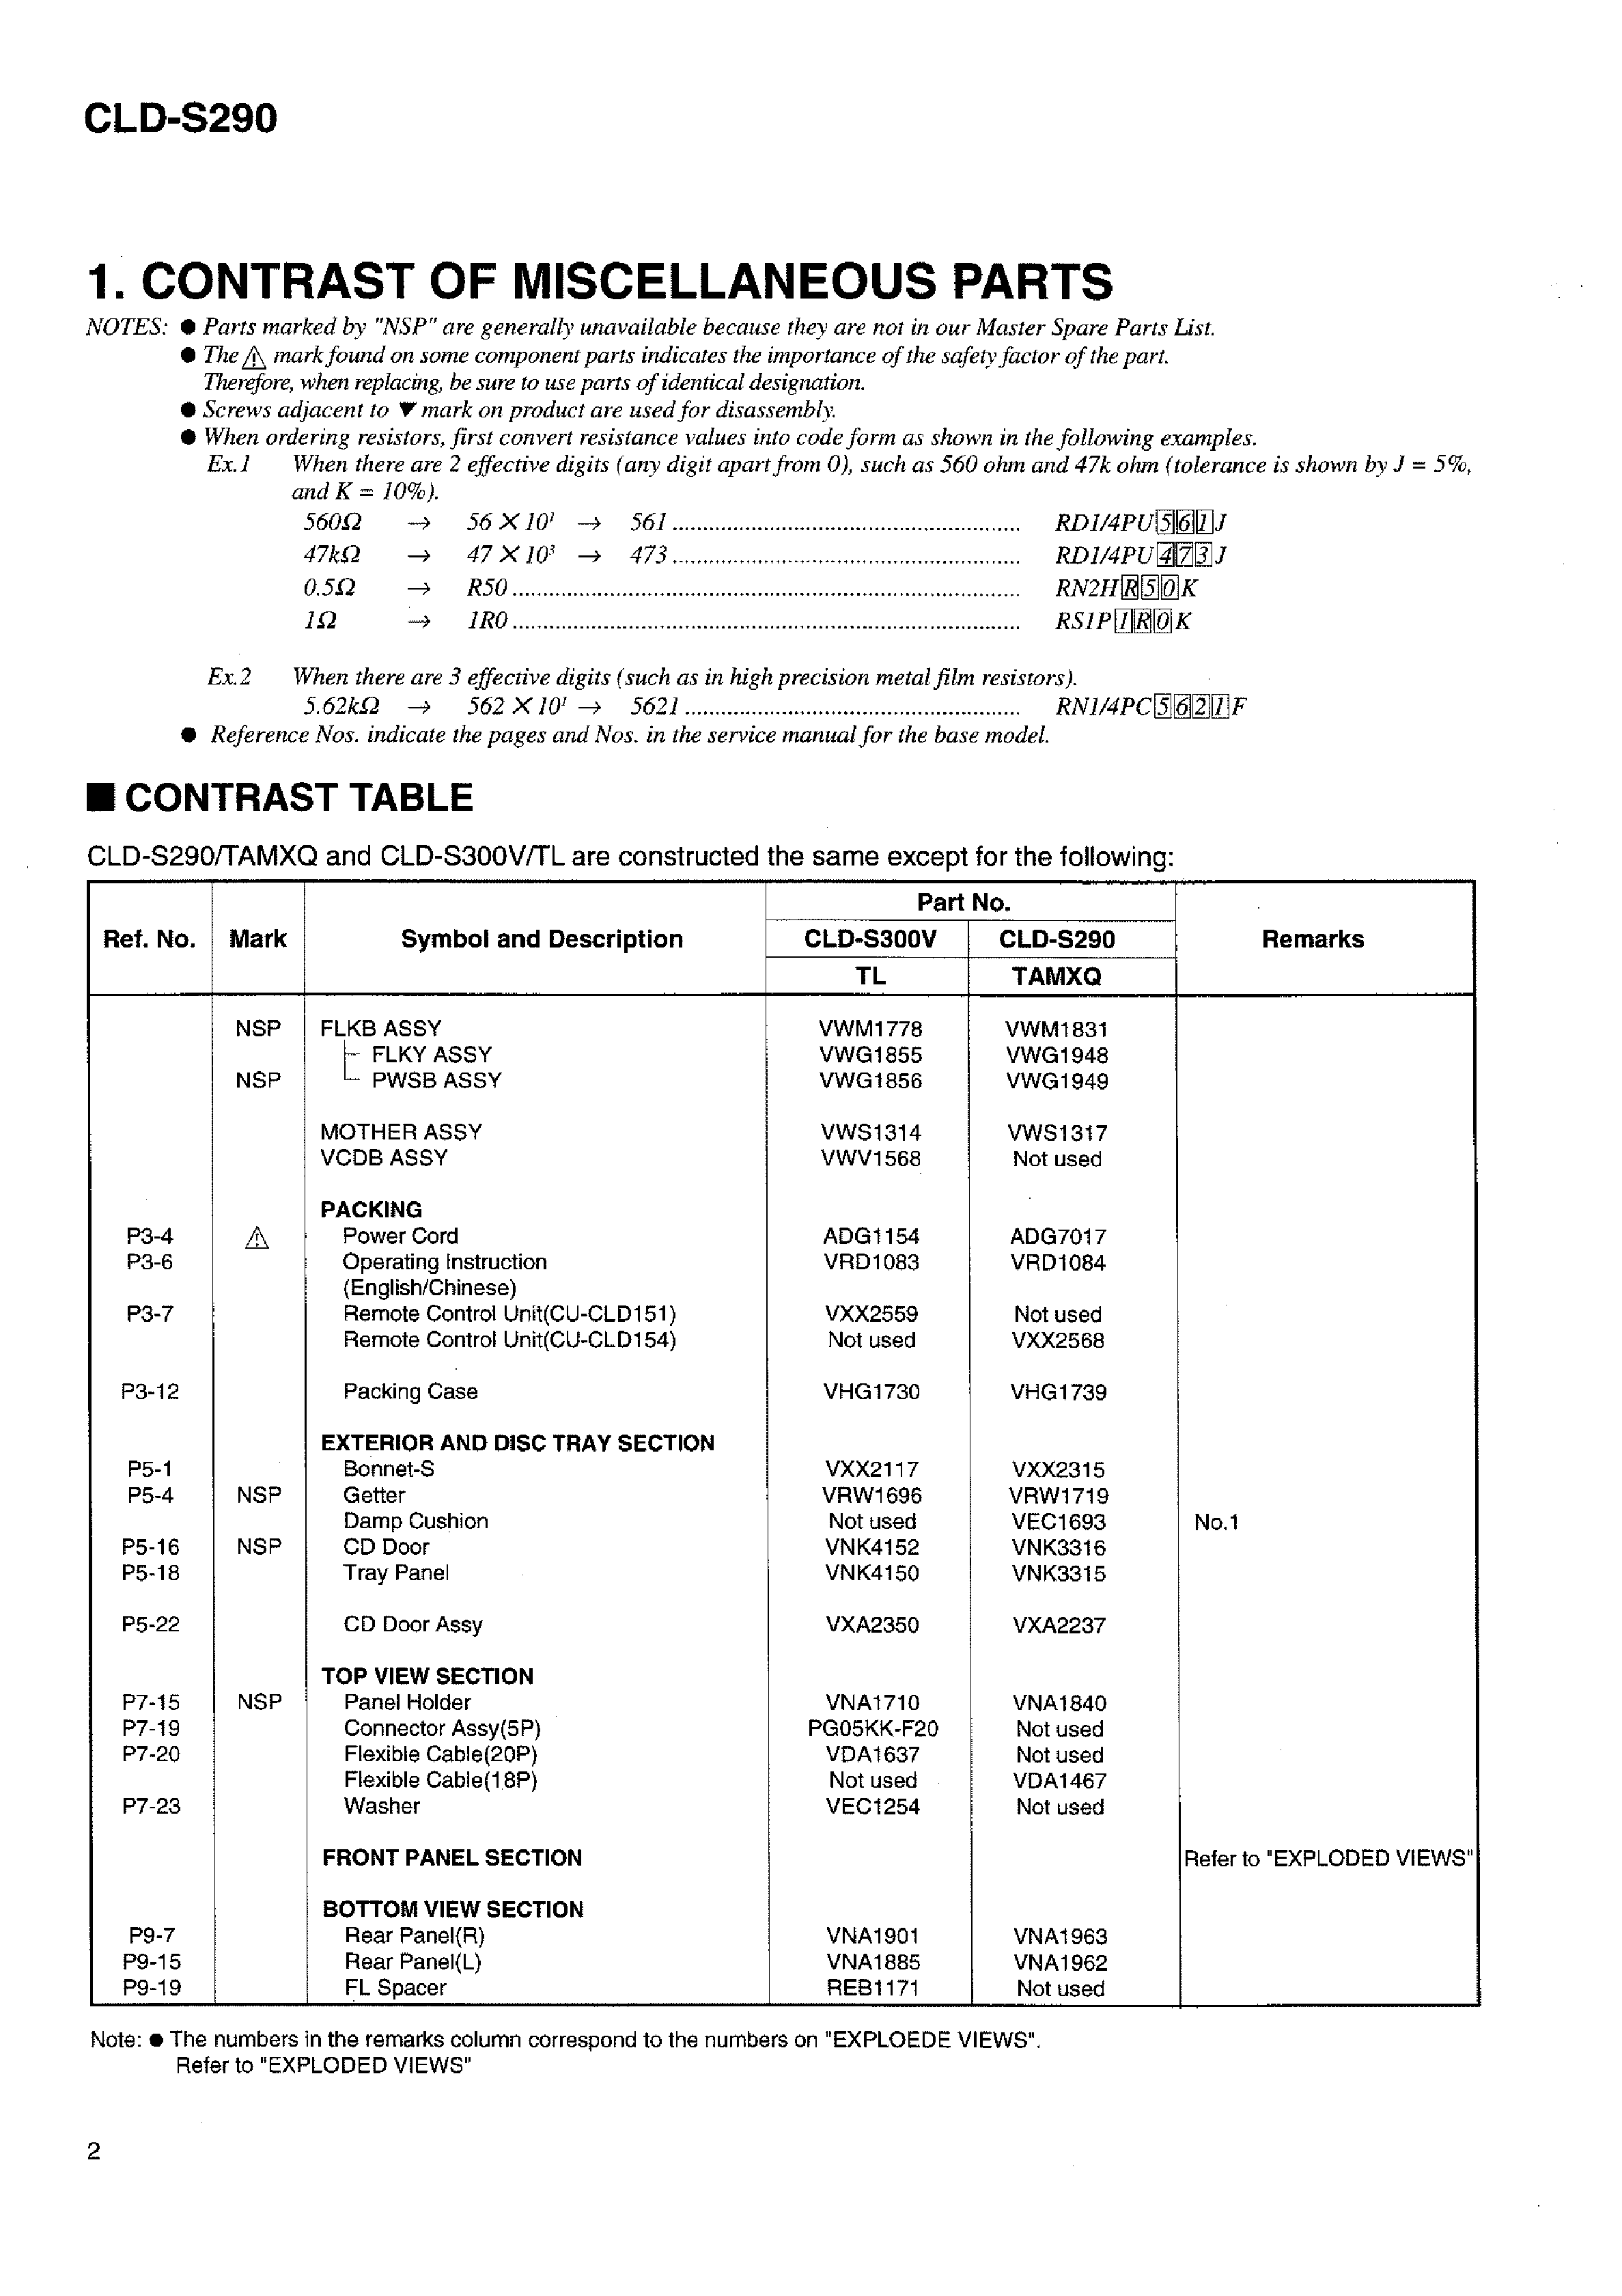 PIONEER CLD-S290 RRV1886 SM service manual (2nd page)